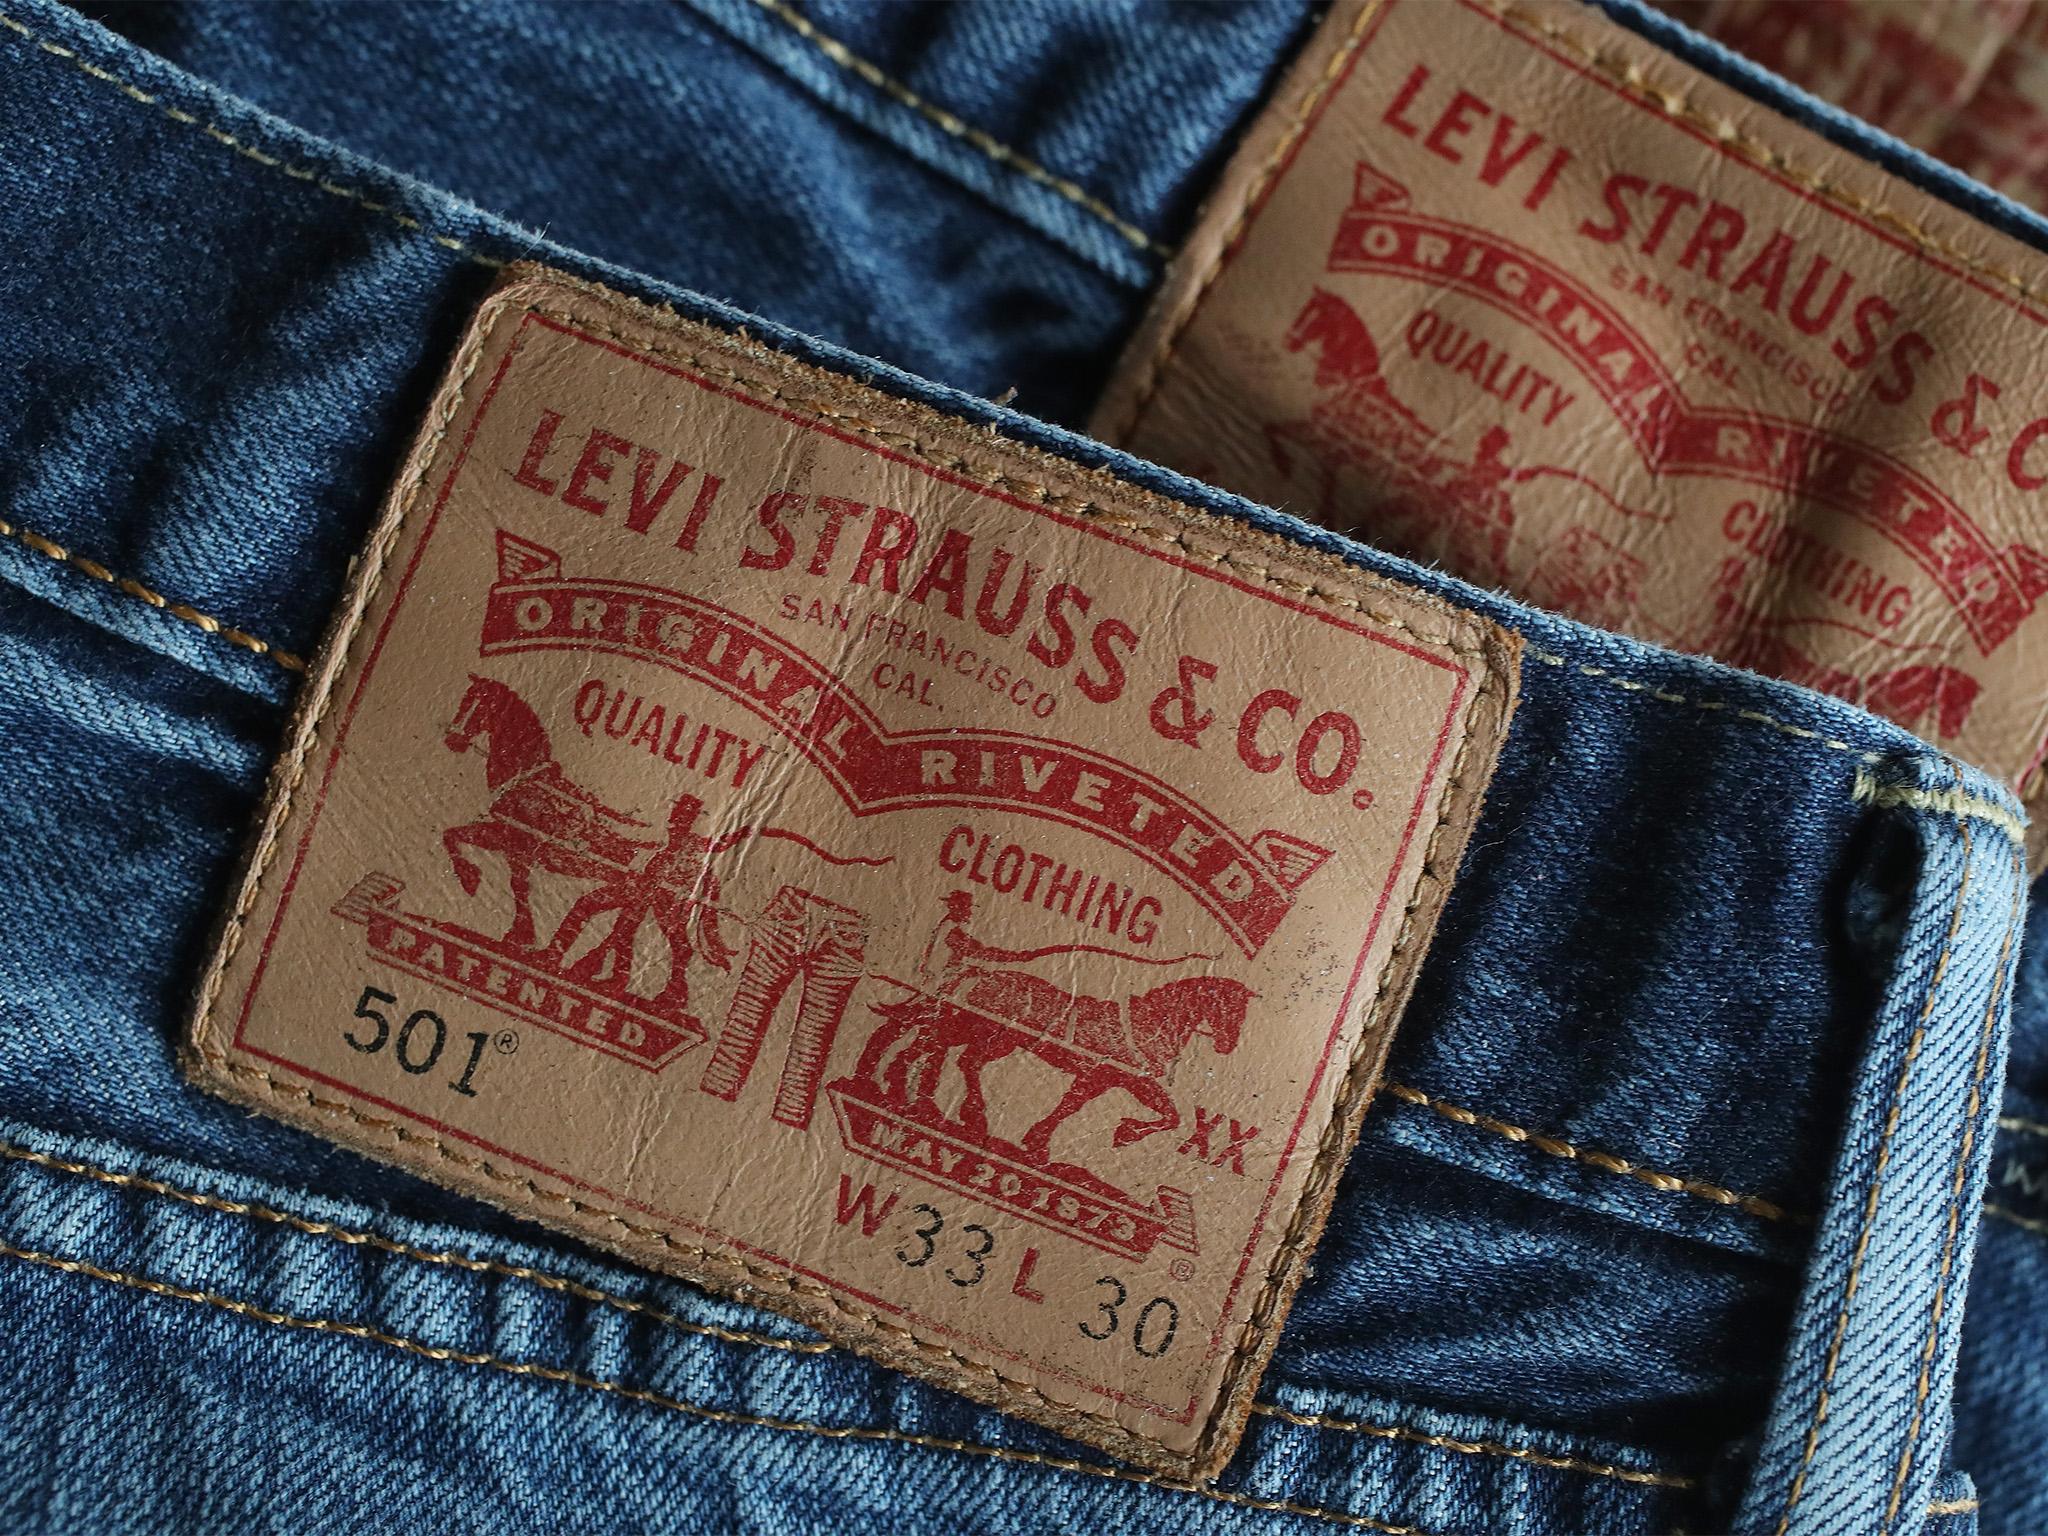 Levi Strauss joins up with gun control group: 'Americans shouldn't